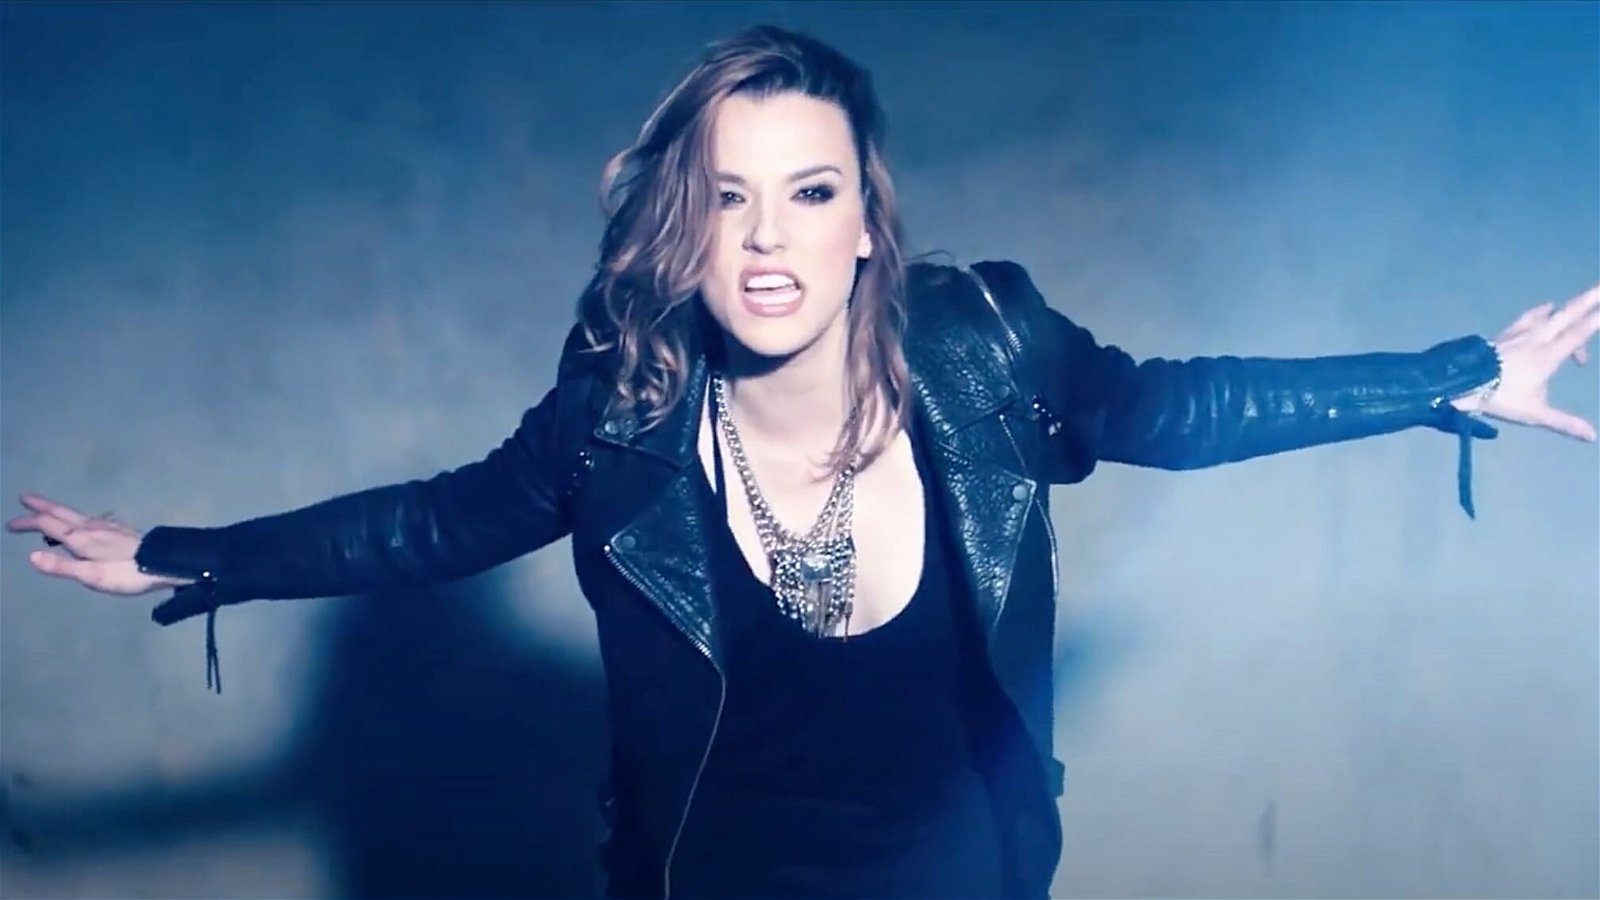 Halestorm Will Out New Single "Back From The Dead" in August 2021